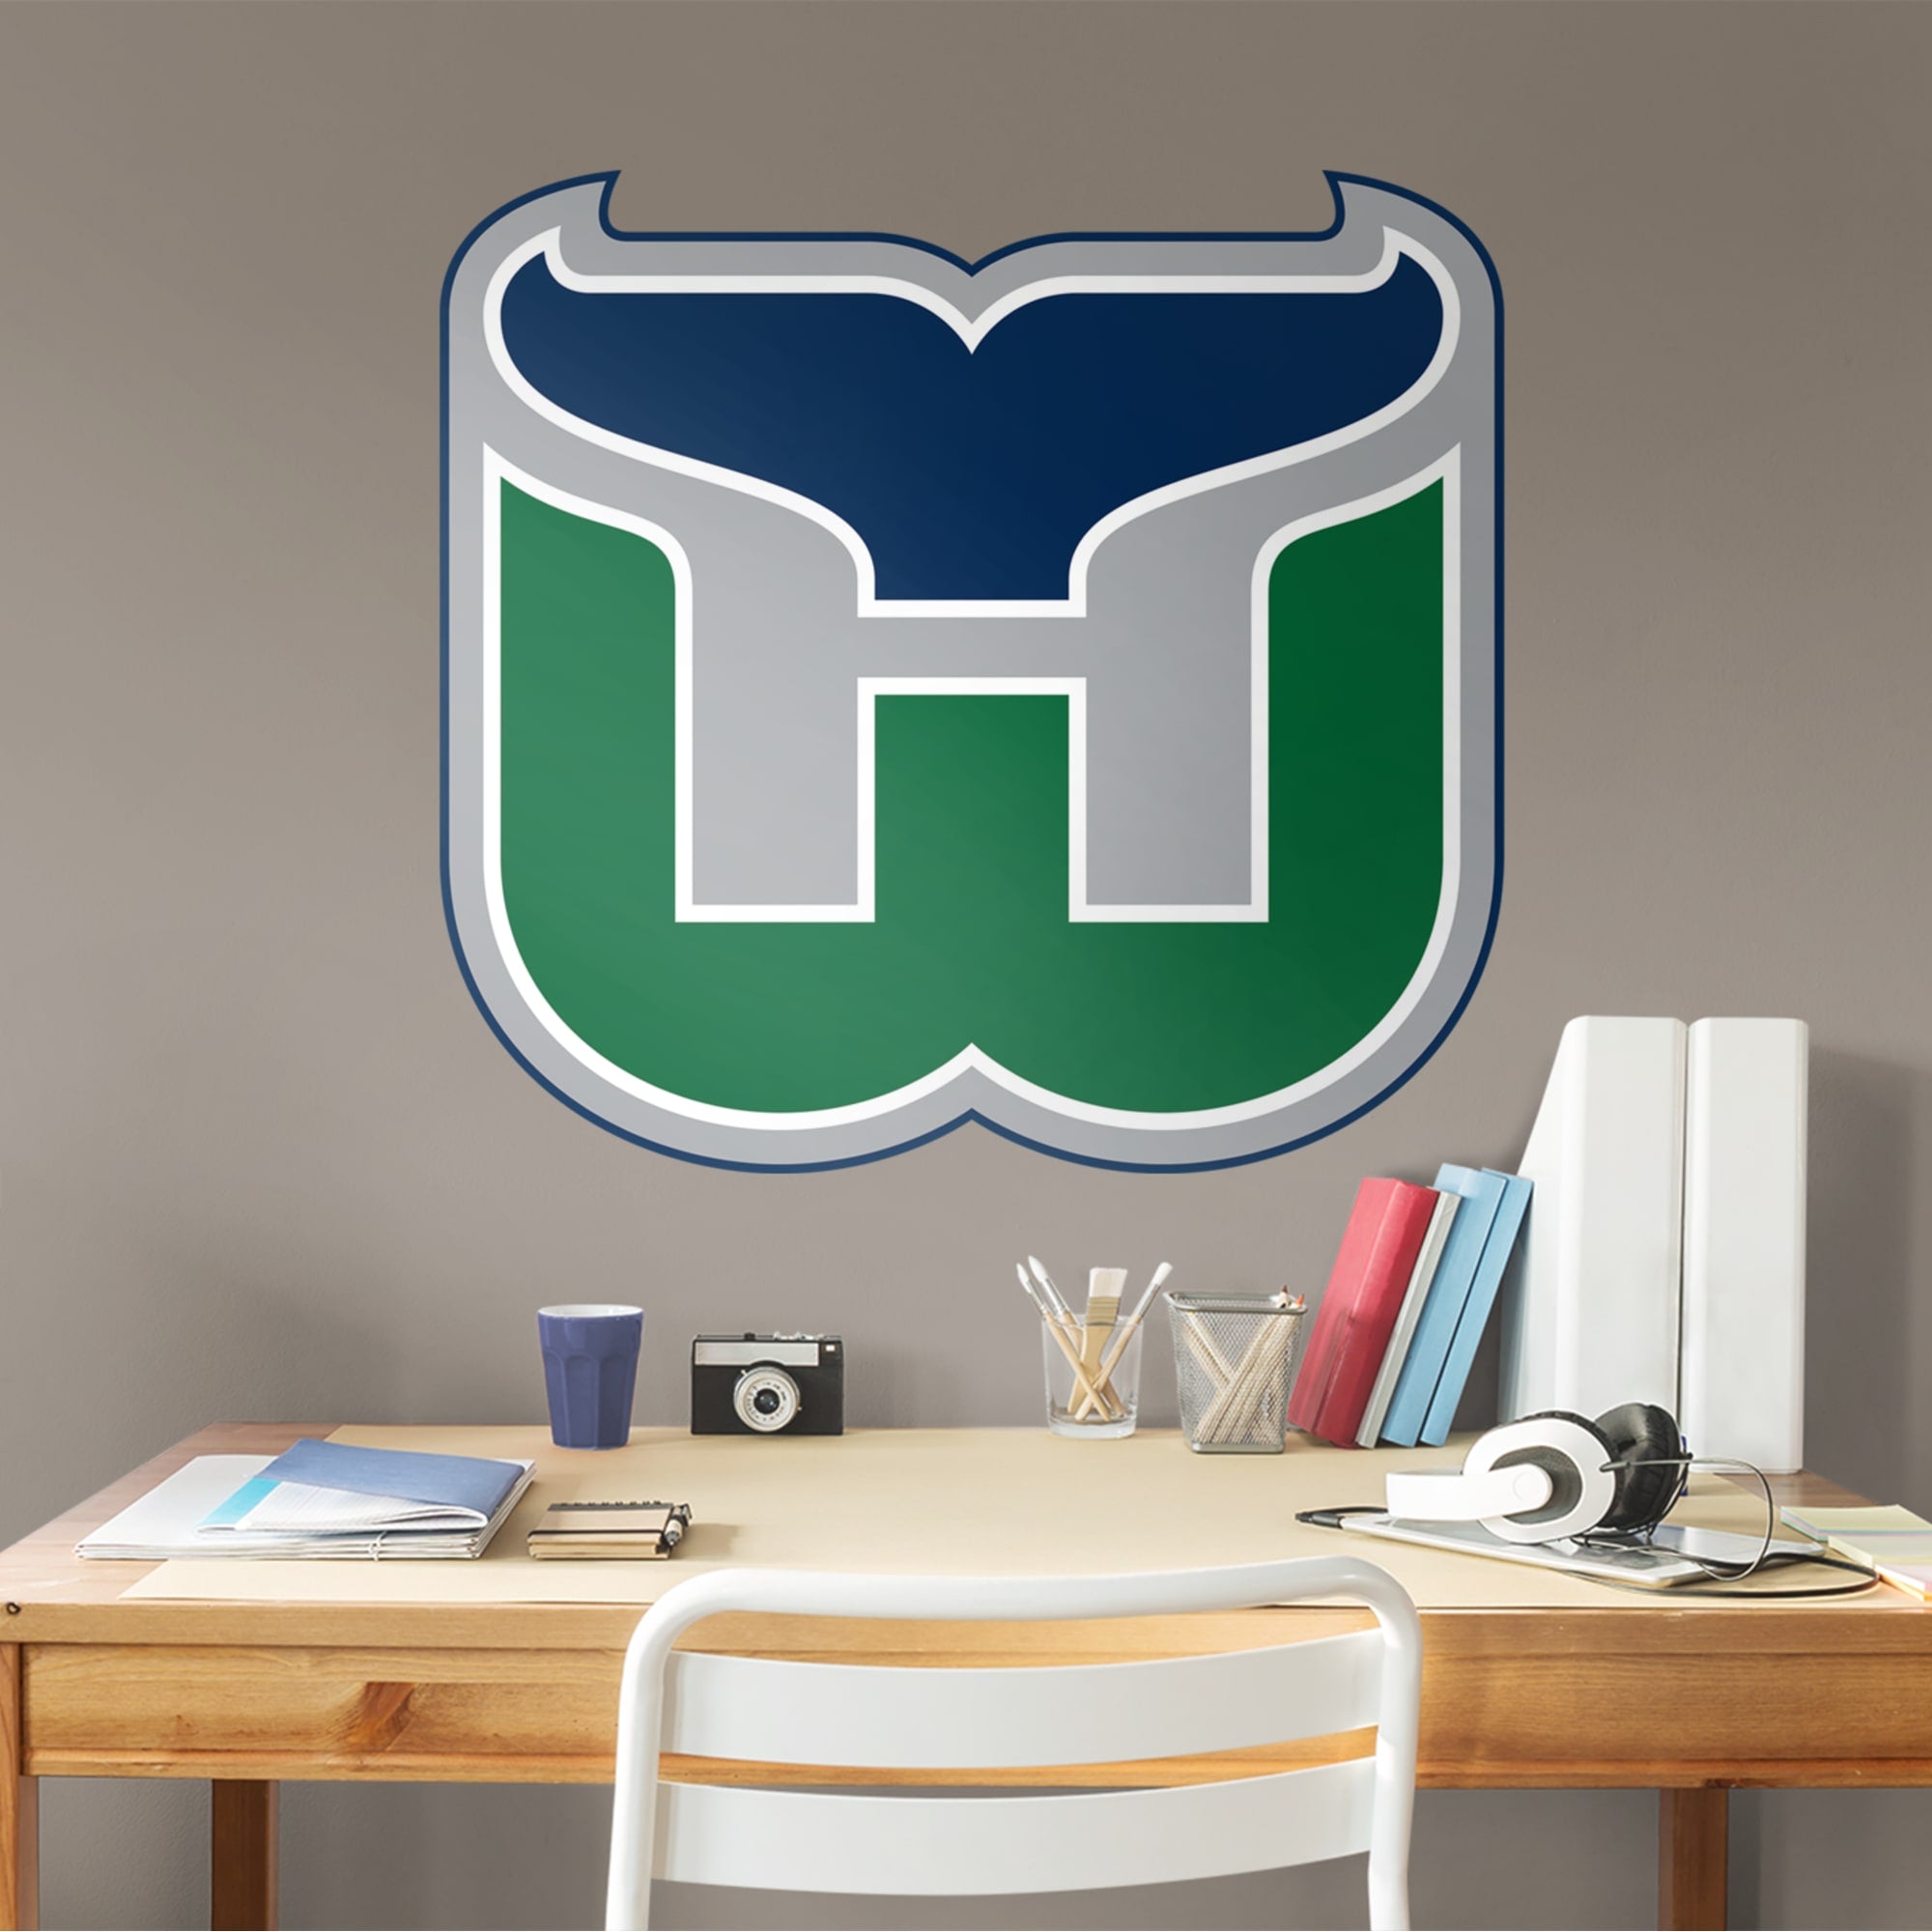 Hartford Whalers for Carolina Hurricanes: Vintage Logo - Officially Licensed NHL Removable Wall Decal 40.0"W x 38.0"H by Fathead